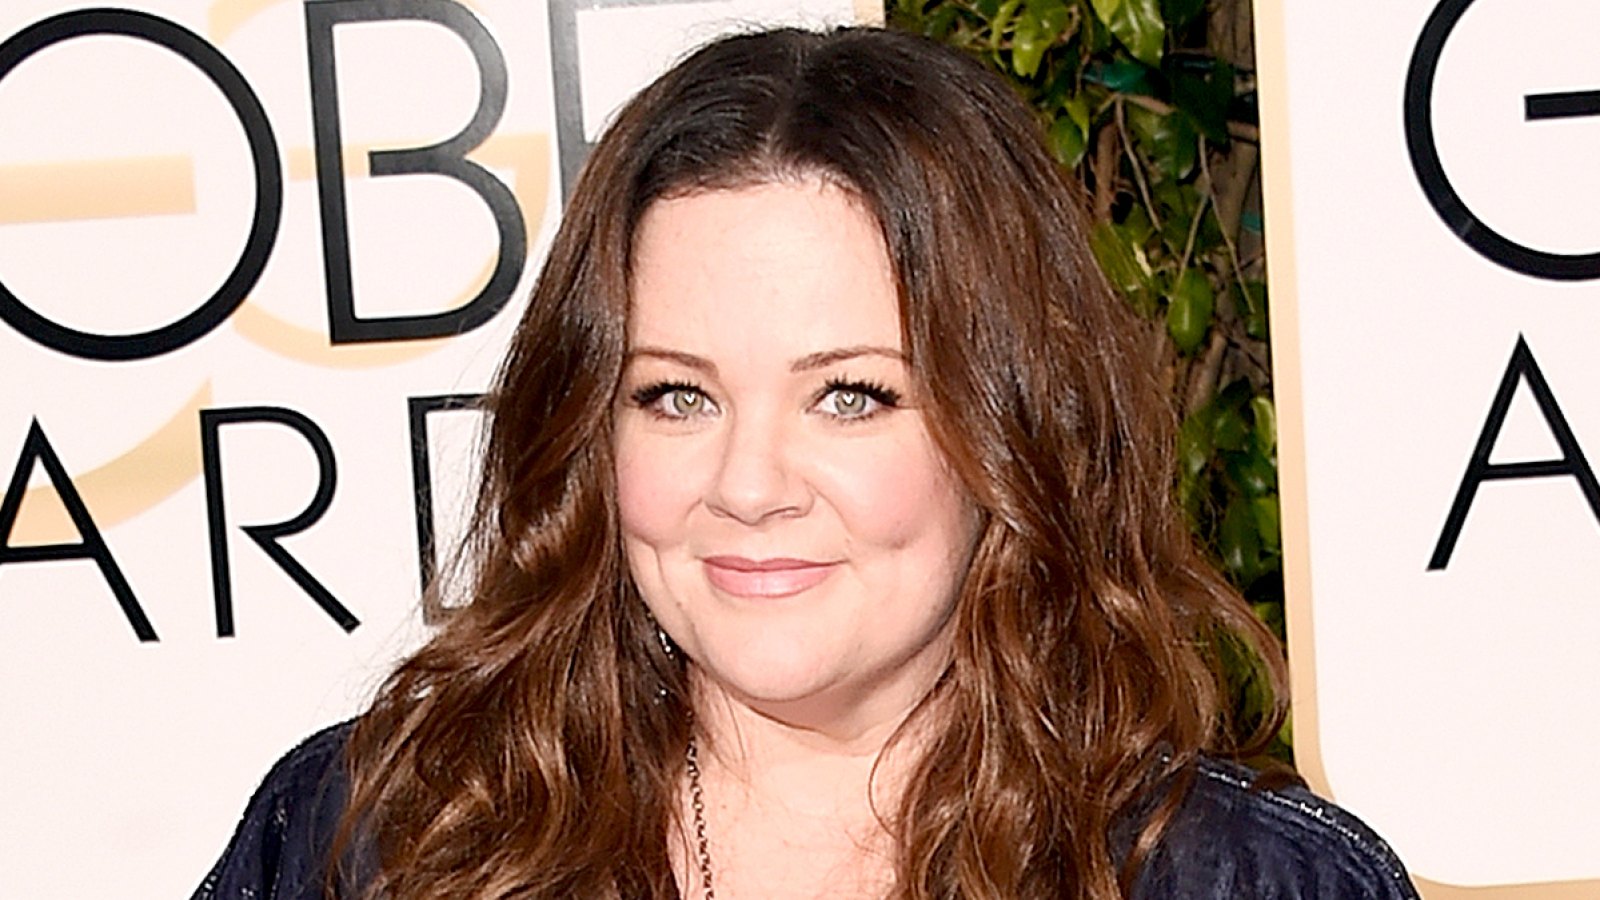 Melissa McCarthy attends the 73rd Annual Golden Globe Awards.